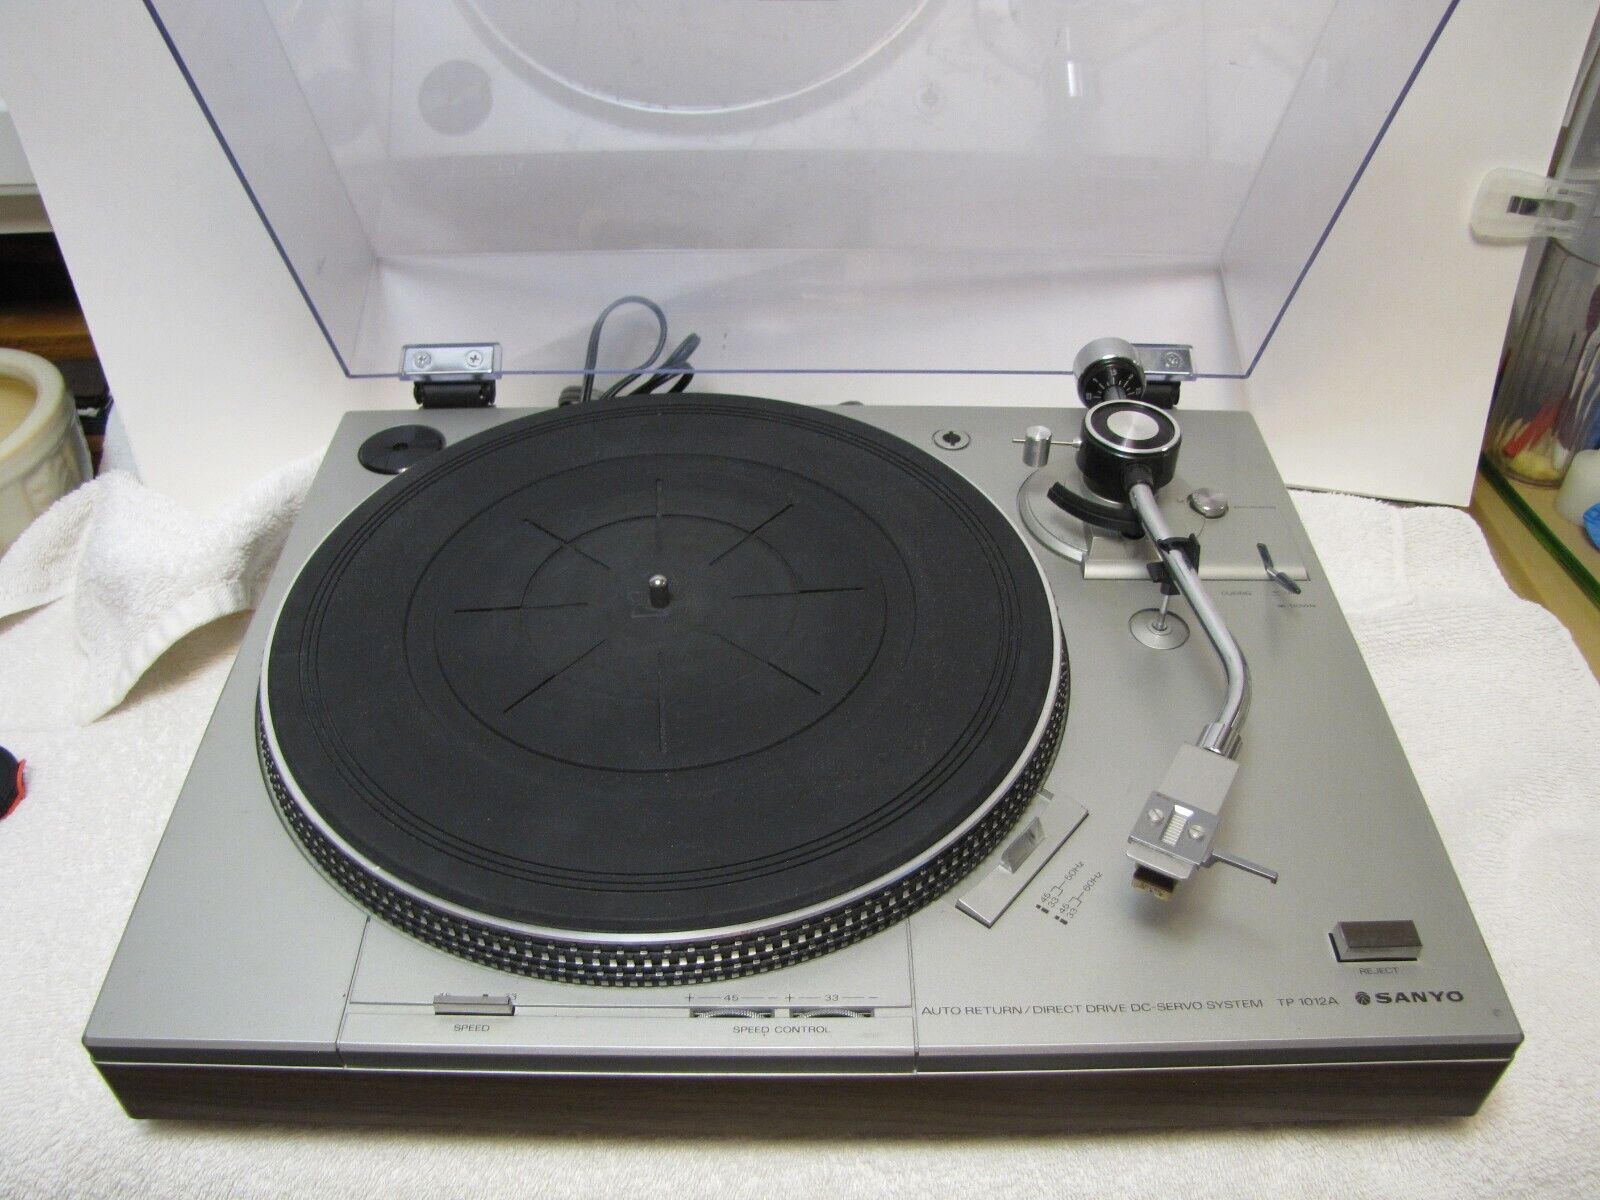 What Year Was Sanyo Turntable 1012A Manufactured